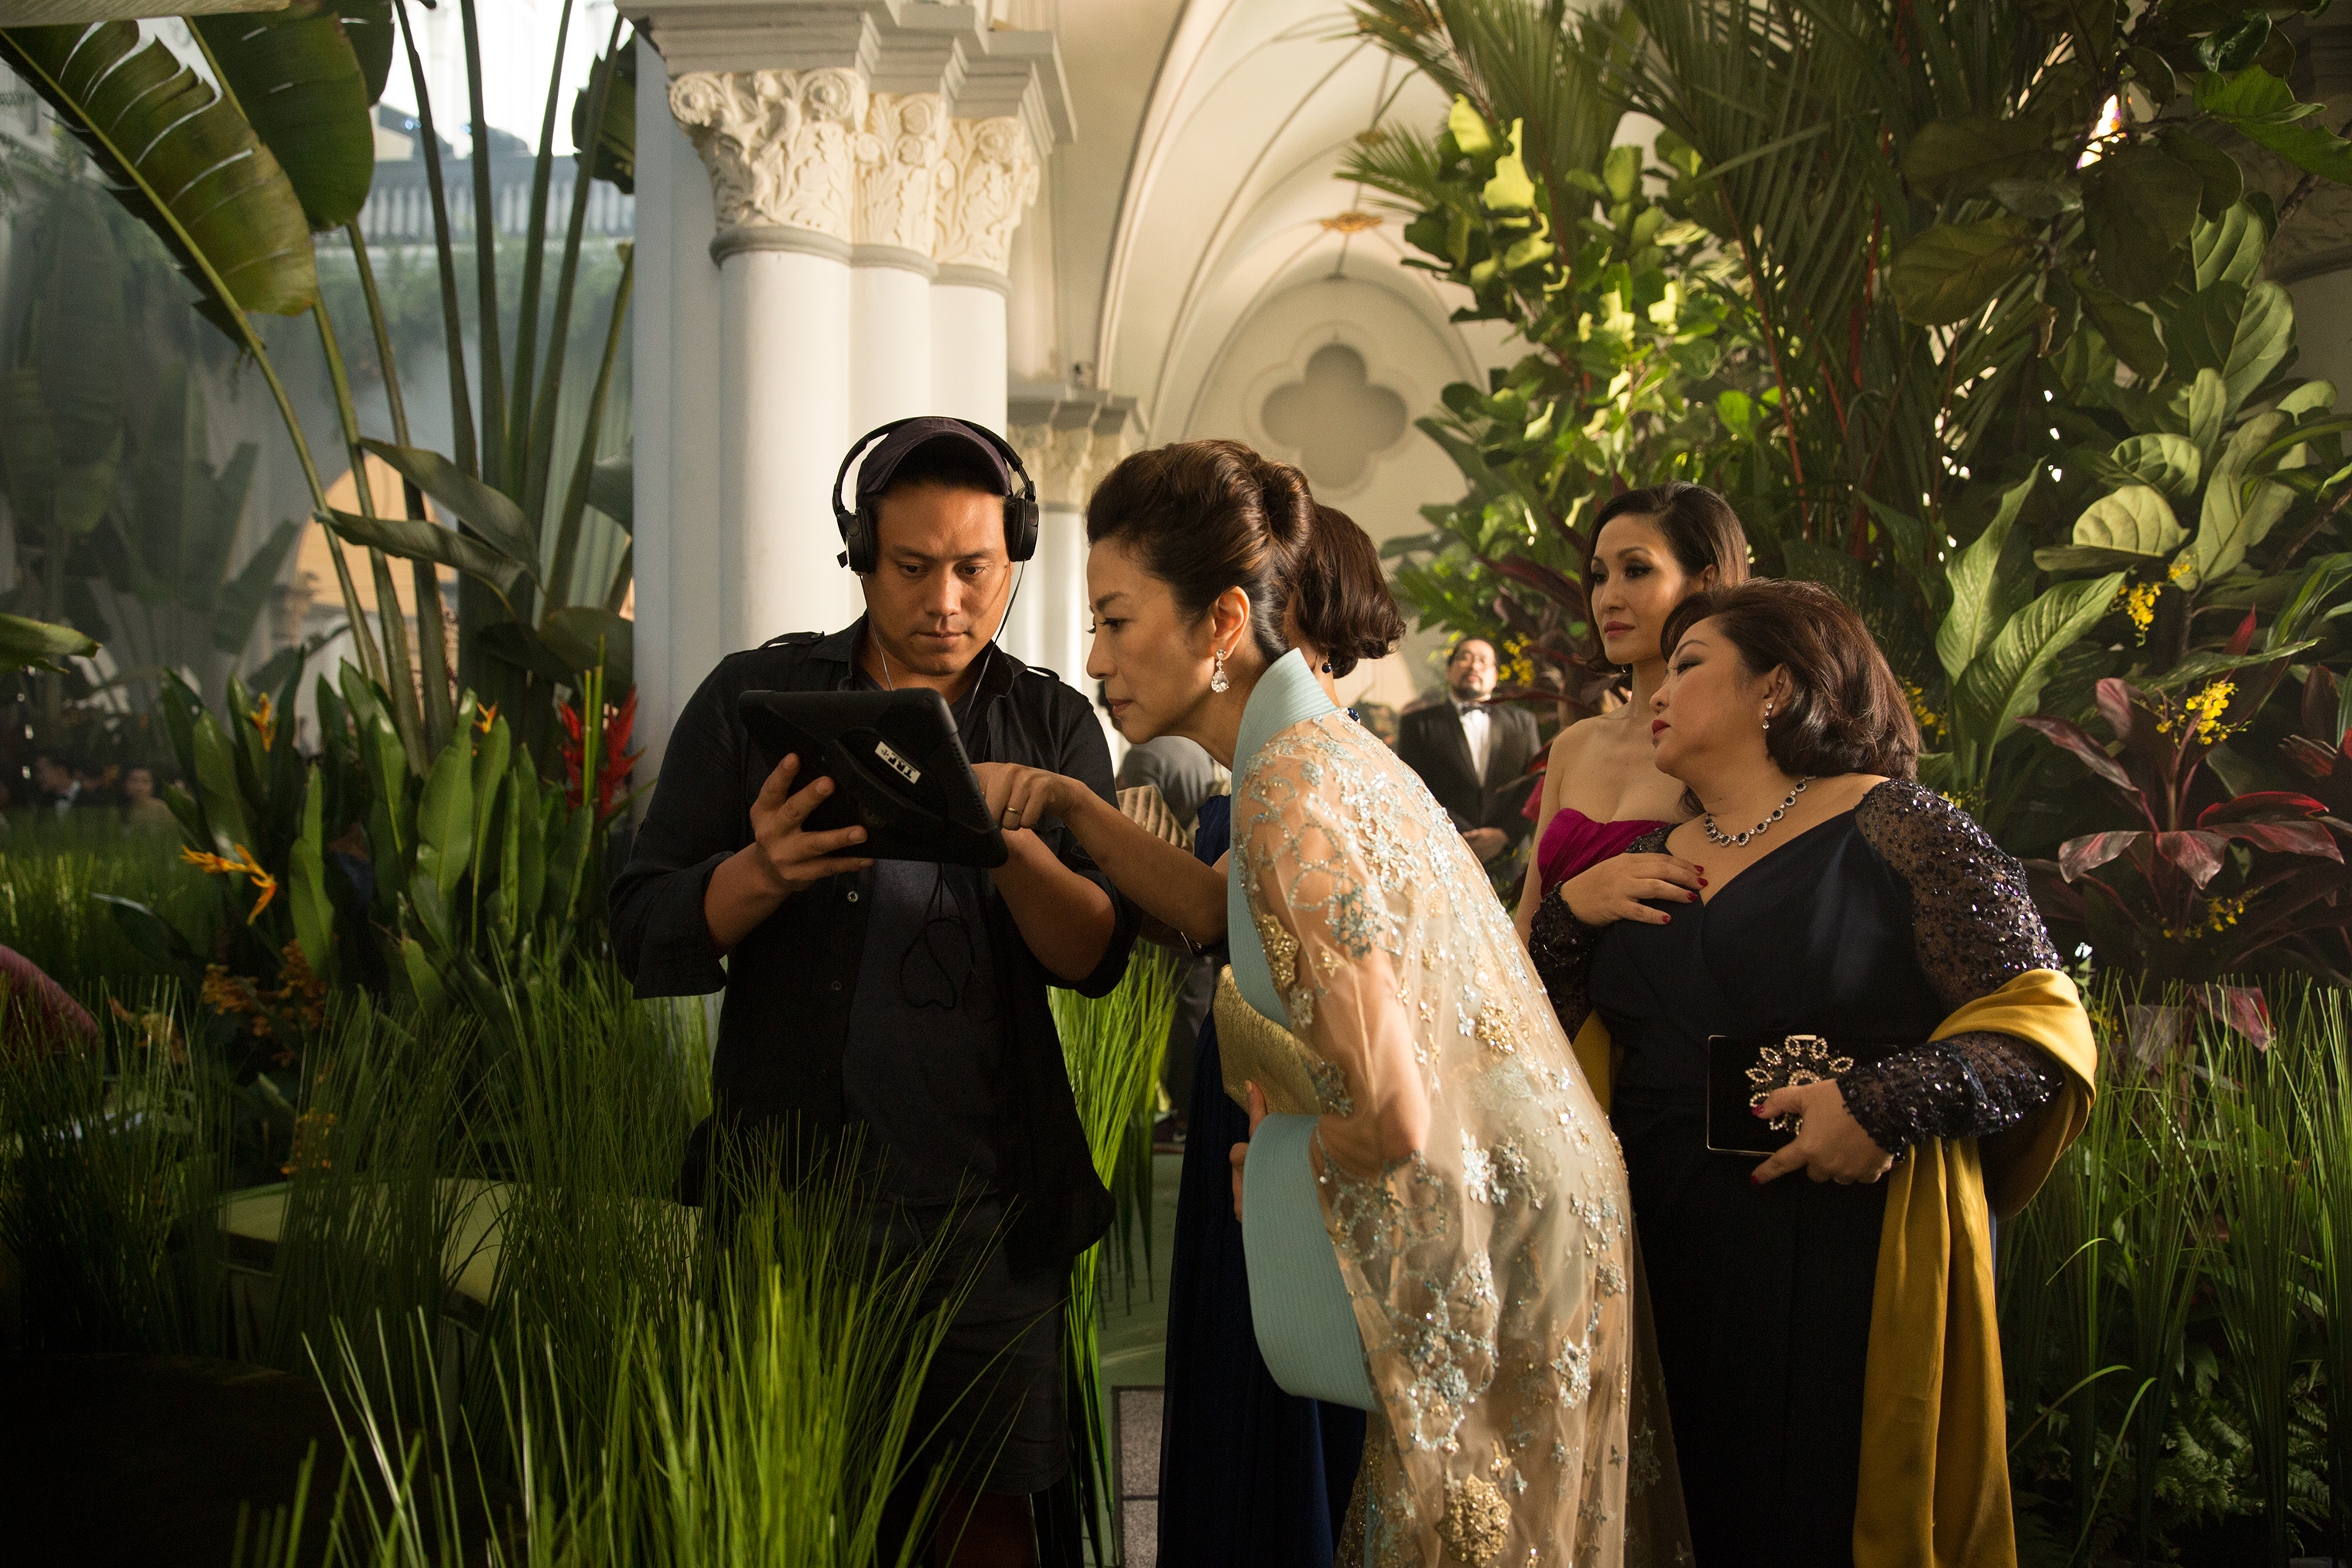 Michelle Yeoh (center) worked with Jon M. Chu (left) to add dimension to her character: “Where she was coming from—that was the most important thing for me.” (Sanja Bucko—Warner Bros.)